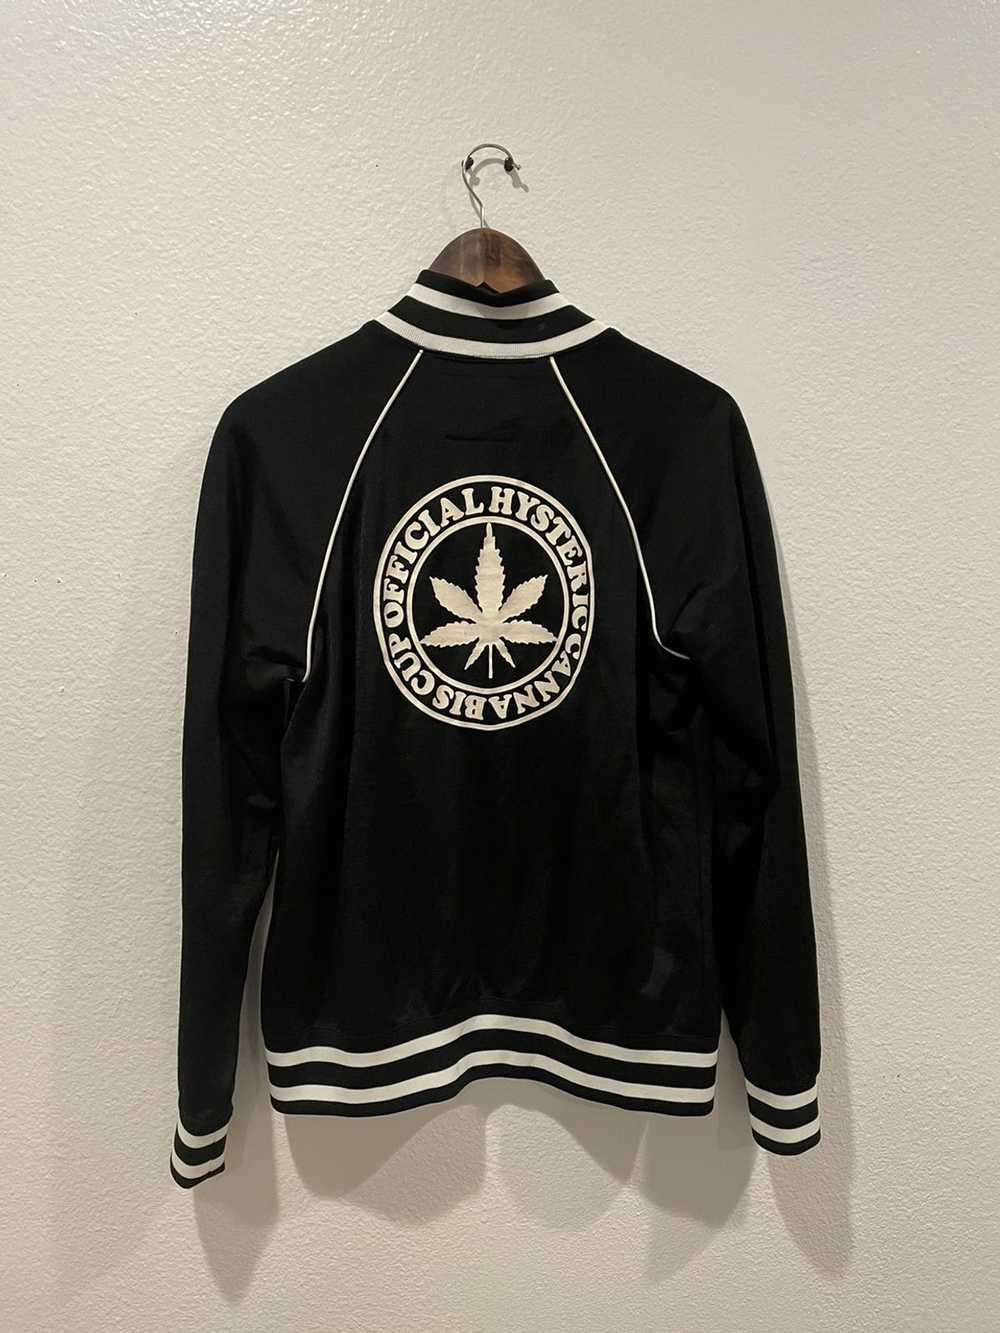 Hysteric Glamour Hysteric Glamour Cannabis Cup Tr… - image 2